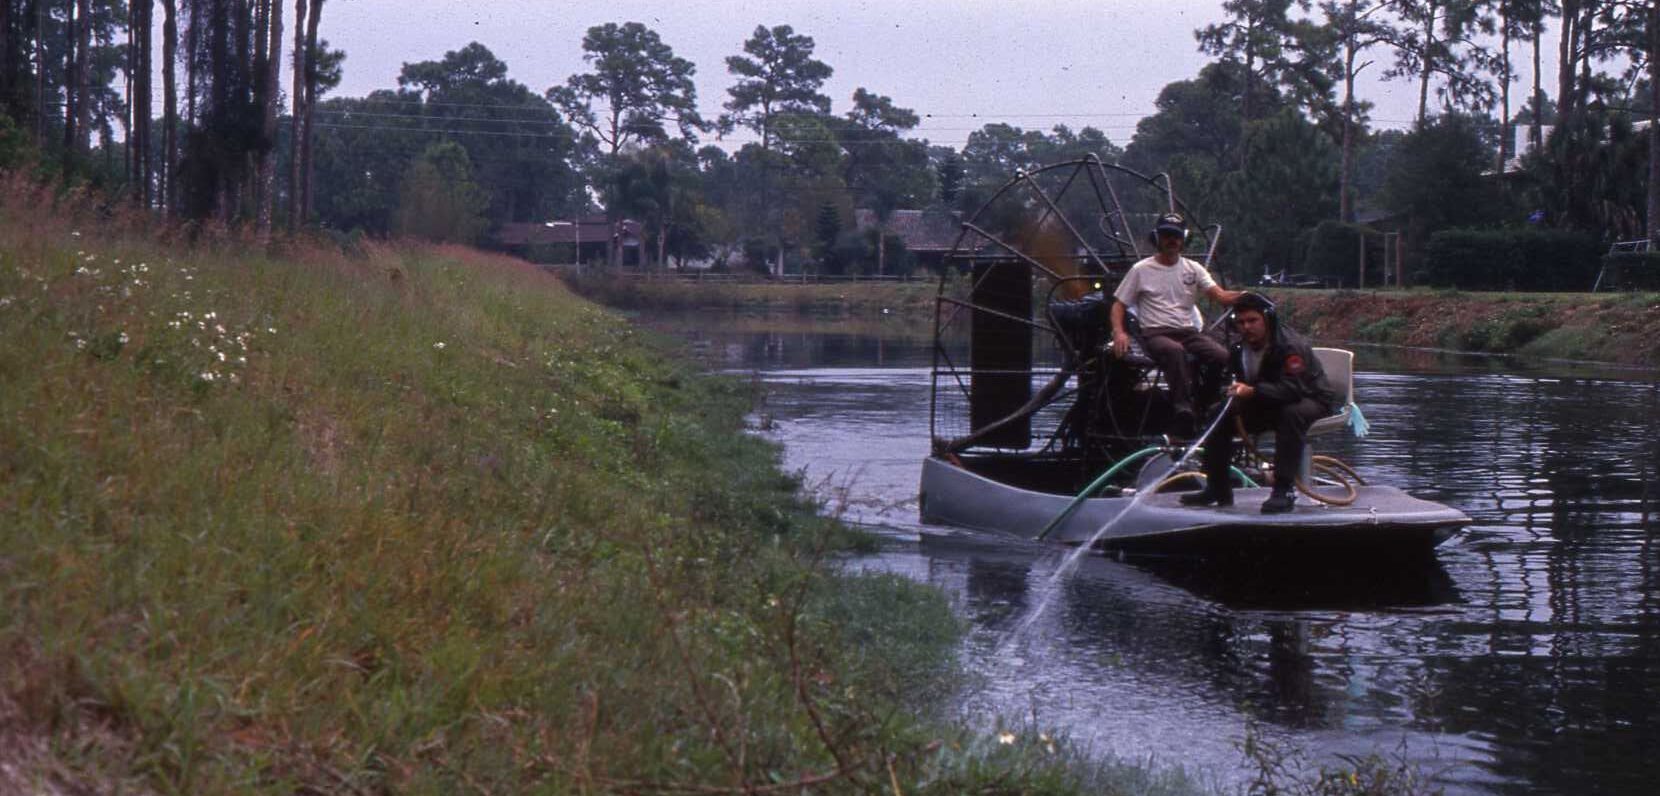 County employees on boat clean up vegetation in water